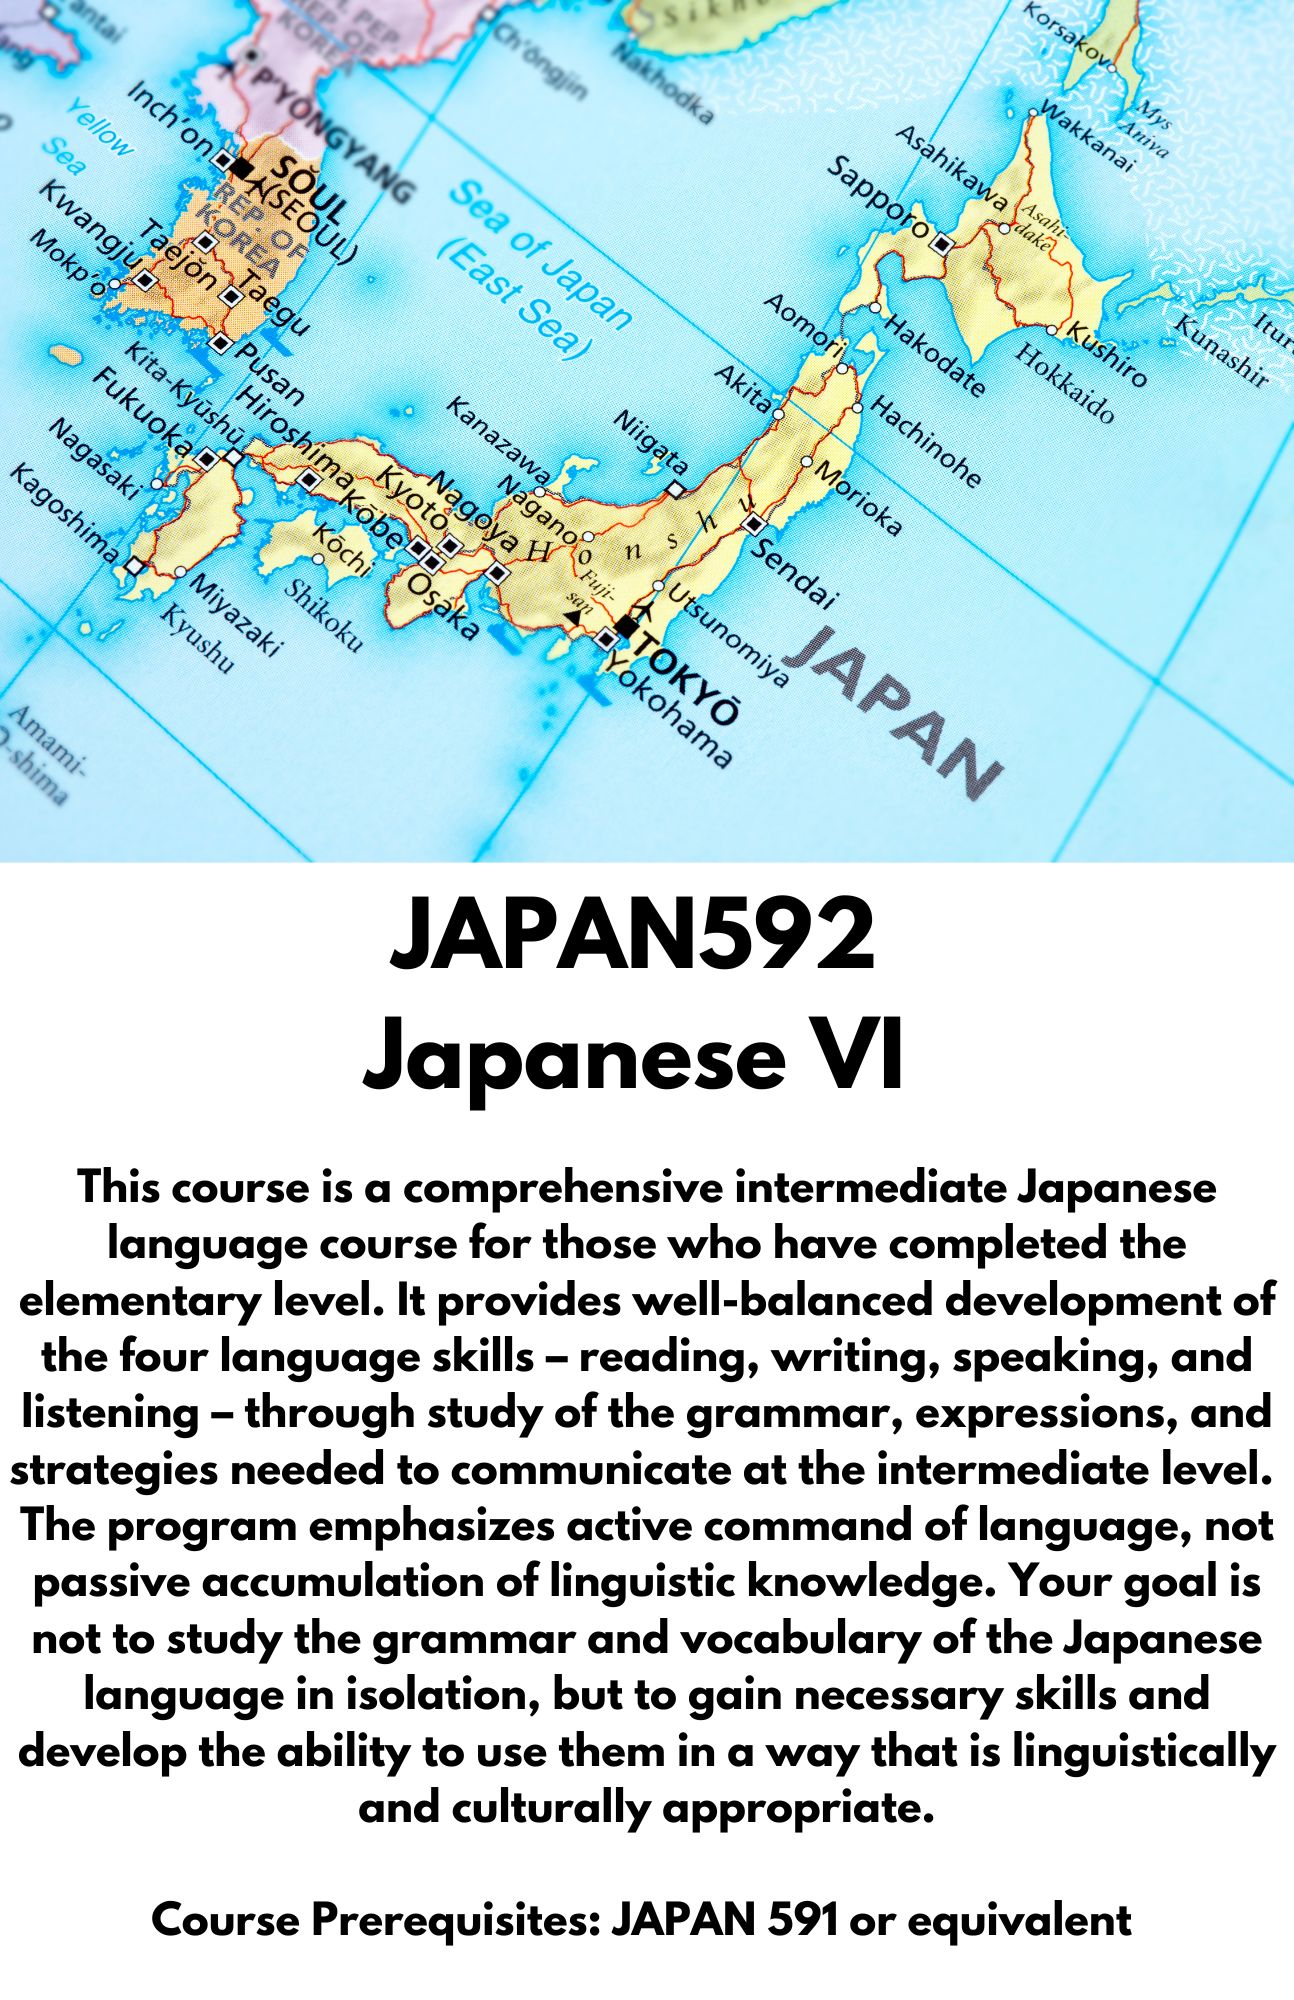 JAPAN592  Japanese VI. This course is a comprehensive intermediate Japanese language course for those who have completed the elementary level. It provides well-balanced development of the four language skills – reading, writing, speaking, and listening – through study of the grammar, expressions, and strategies needed to communicate at the intermediate level.  The program emphasizes active command of language, not passive accumulation of linguistic knowledge. Your goal is not to study the grammar and vocabulary of the Japanese language in isolation, but to gain necessary skills and develop the ability to use them in a way that is linguistically and culturally appropriate.  Course Prerequisites: JAPAN 591 or equivalent